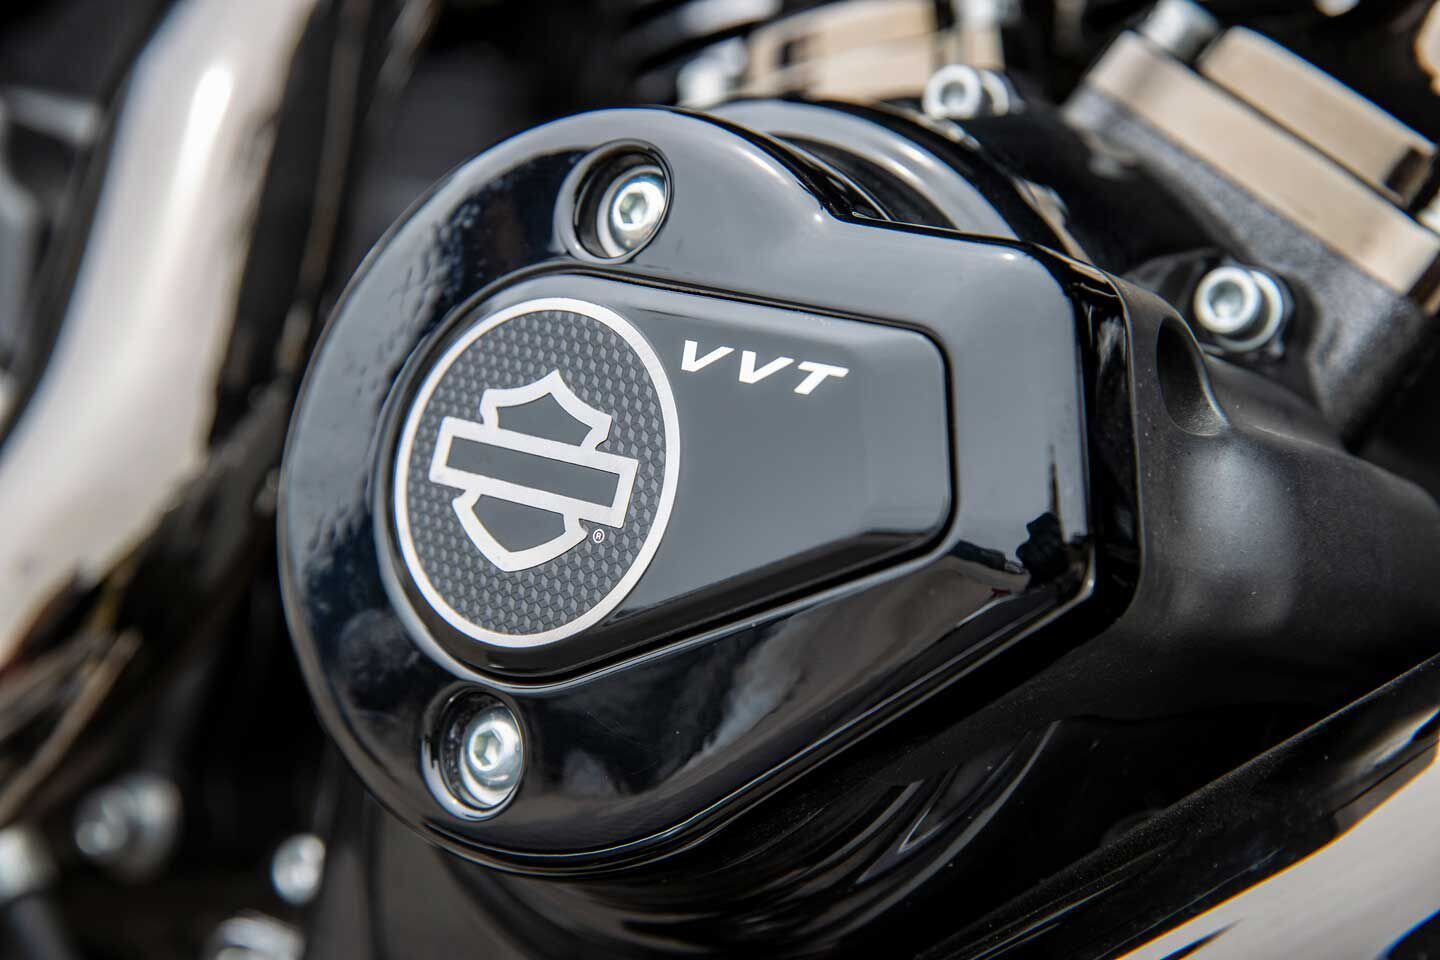 Harley’s new VVT system moves the higher-lift and longer-duration cam through 40 degrees of adjustment relative to the crankshaft.